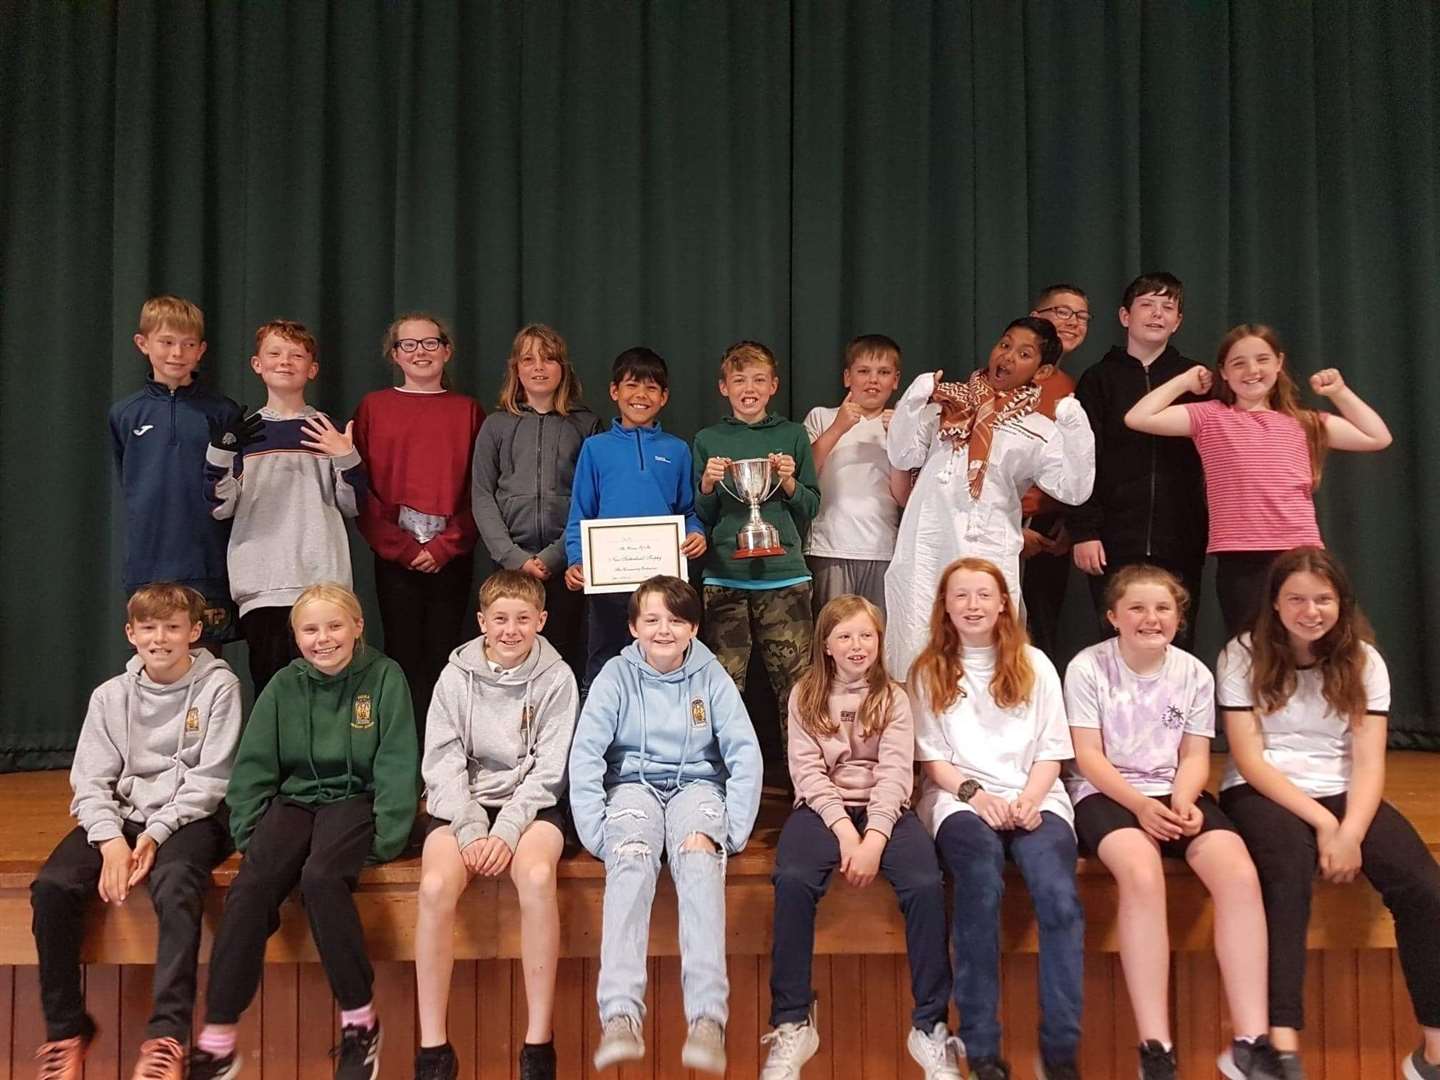 P6-7 pupils won the Nan Sutherland Trophy because of their caring attitude towards each other.